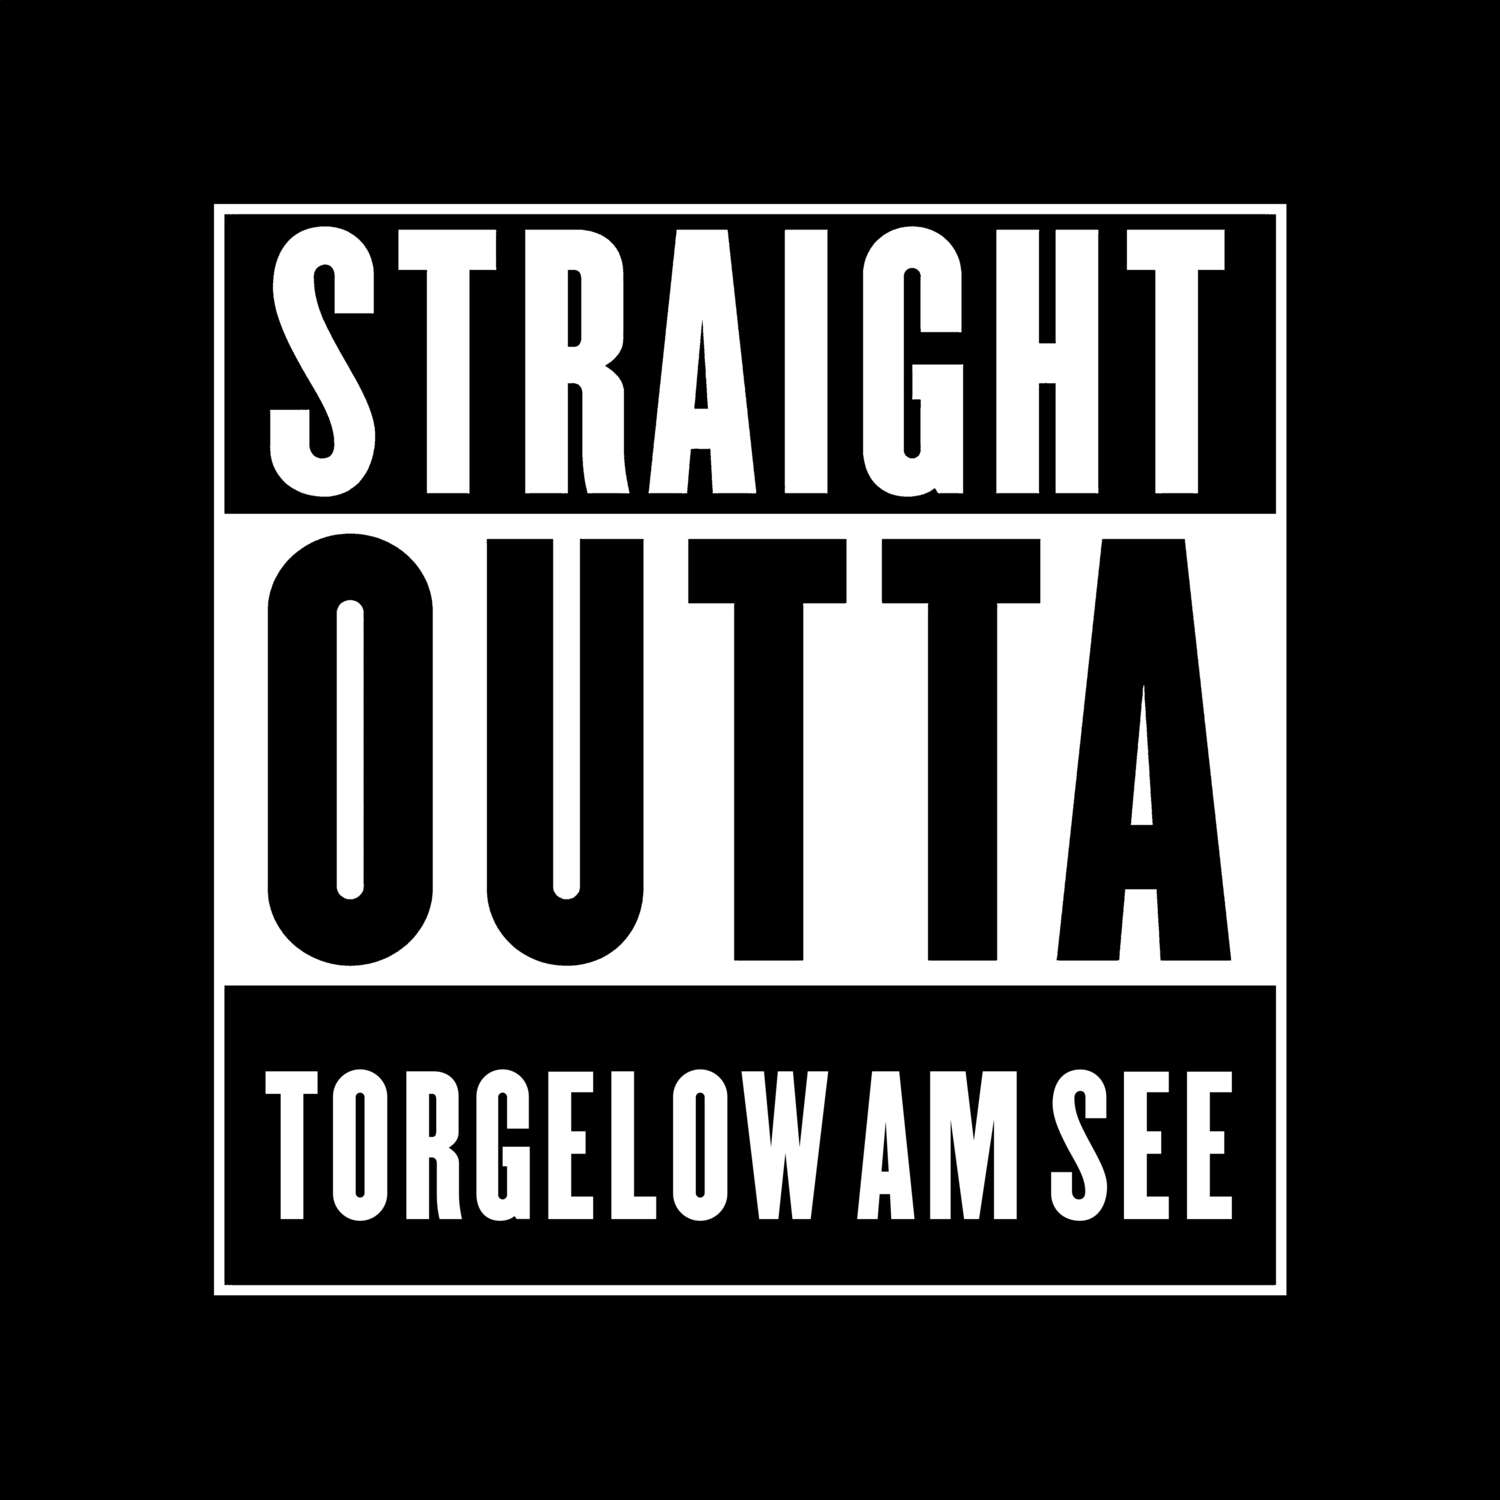 Torgelow am See T-Shirt »Straight Outta«